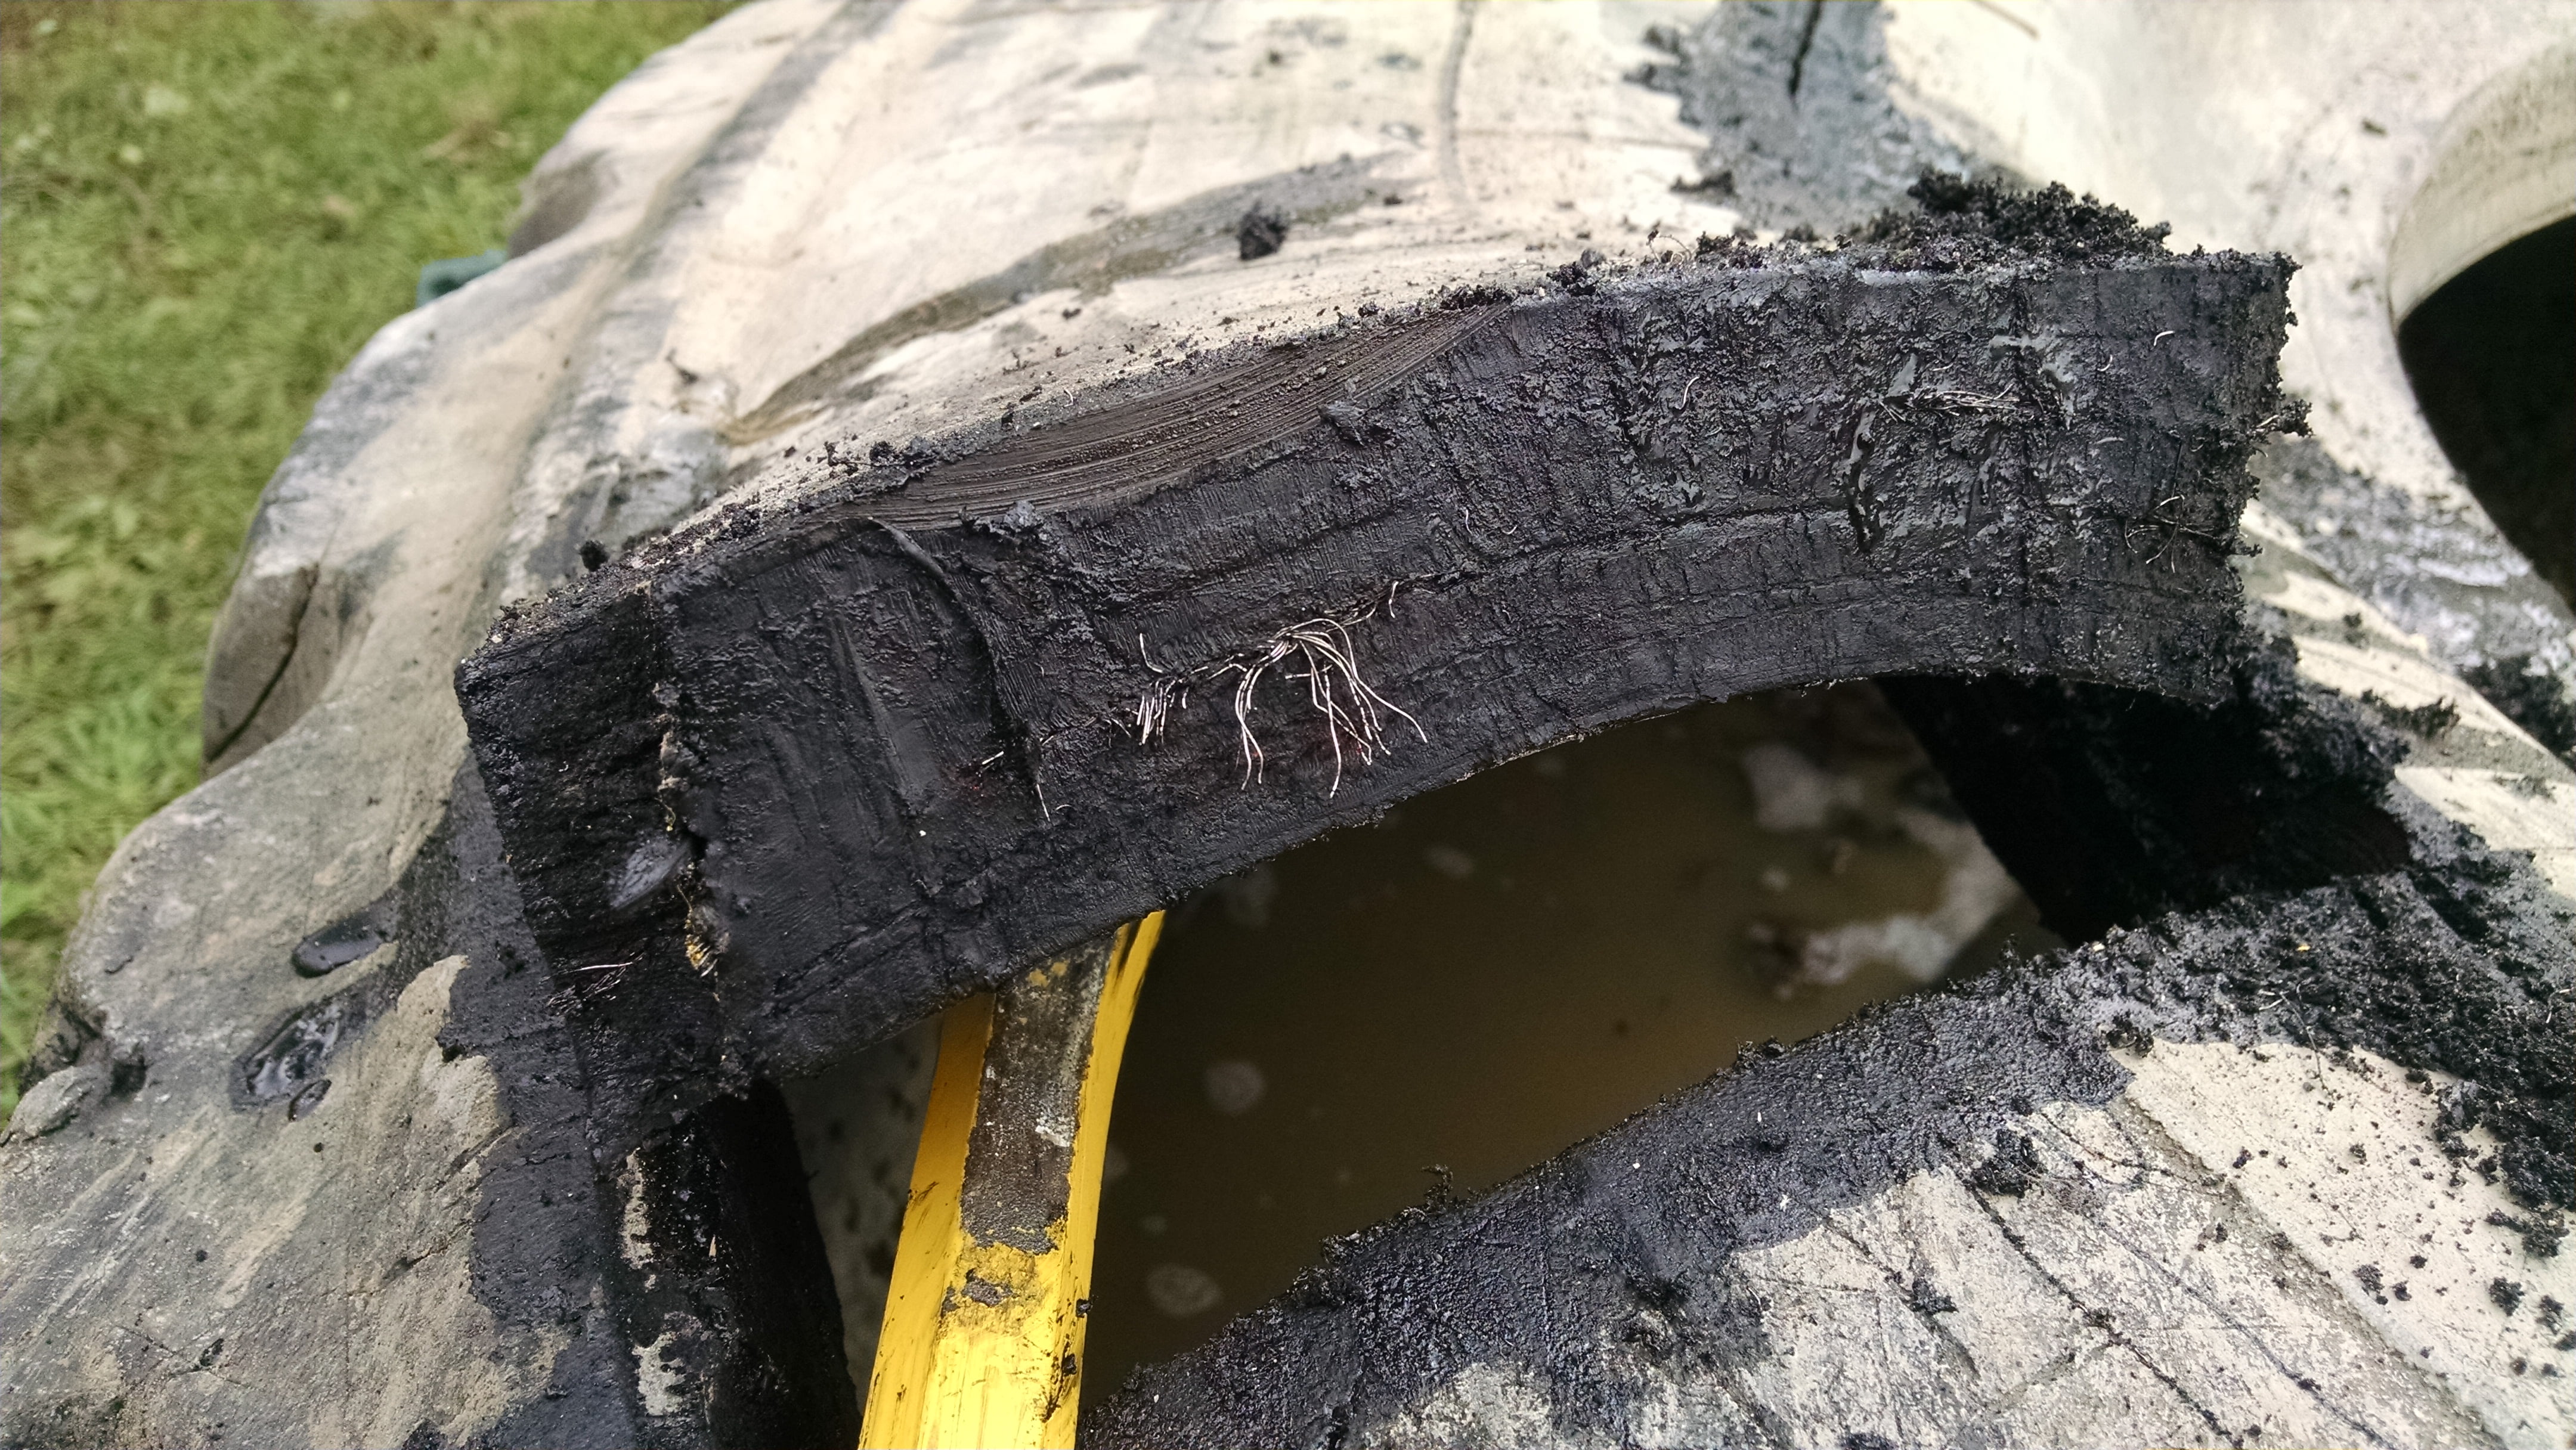 It helps to pry up on the sidewall while cutting.  This sidewall is about 1-1/2 inches thick with several sandwiched layers of rubber and steel.